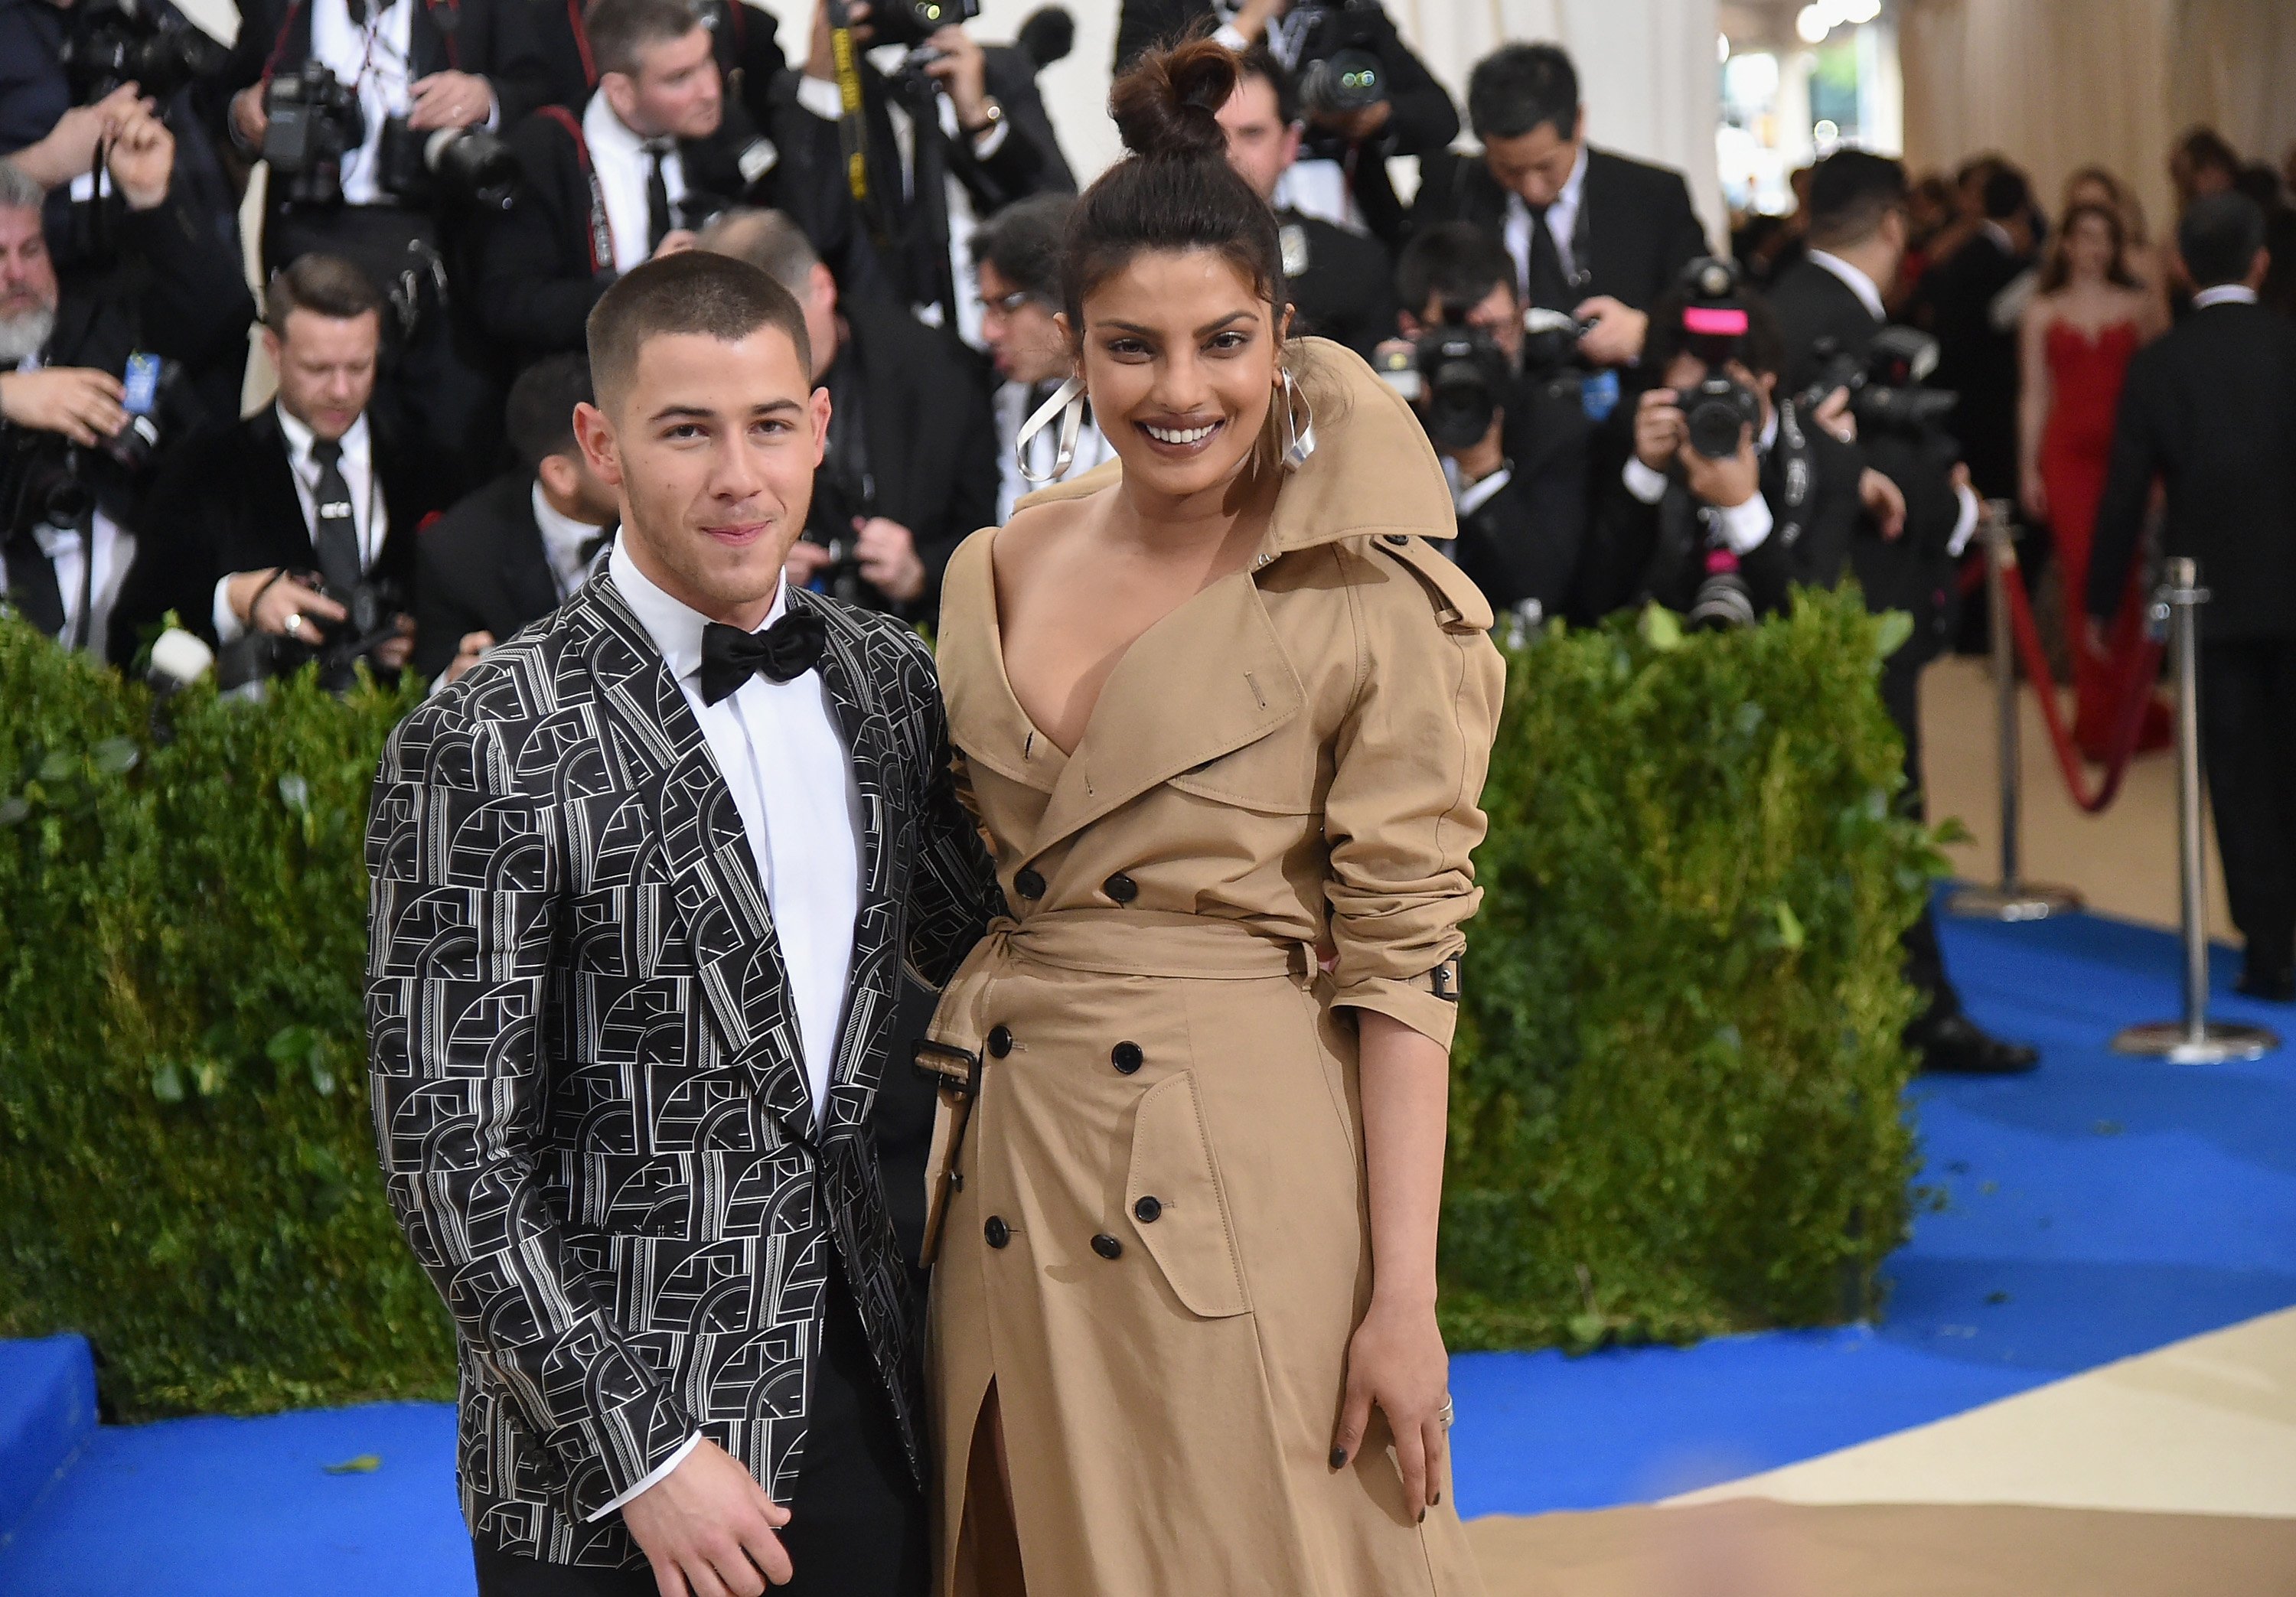 Nick Jonas and Priyanka Chopra attend the Costume Institute Gala in New York City on May 1, 2017 | Photo: Getty Images